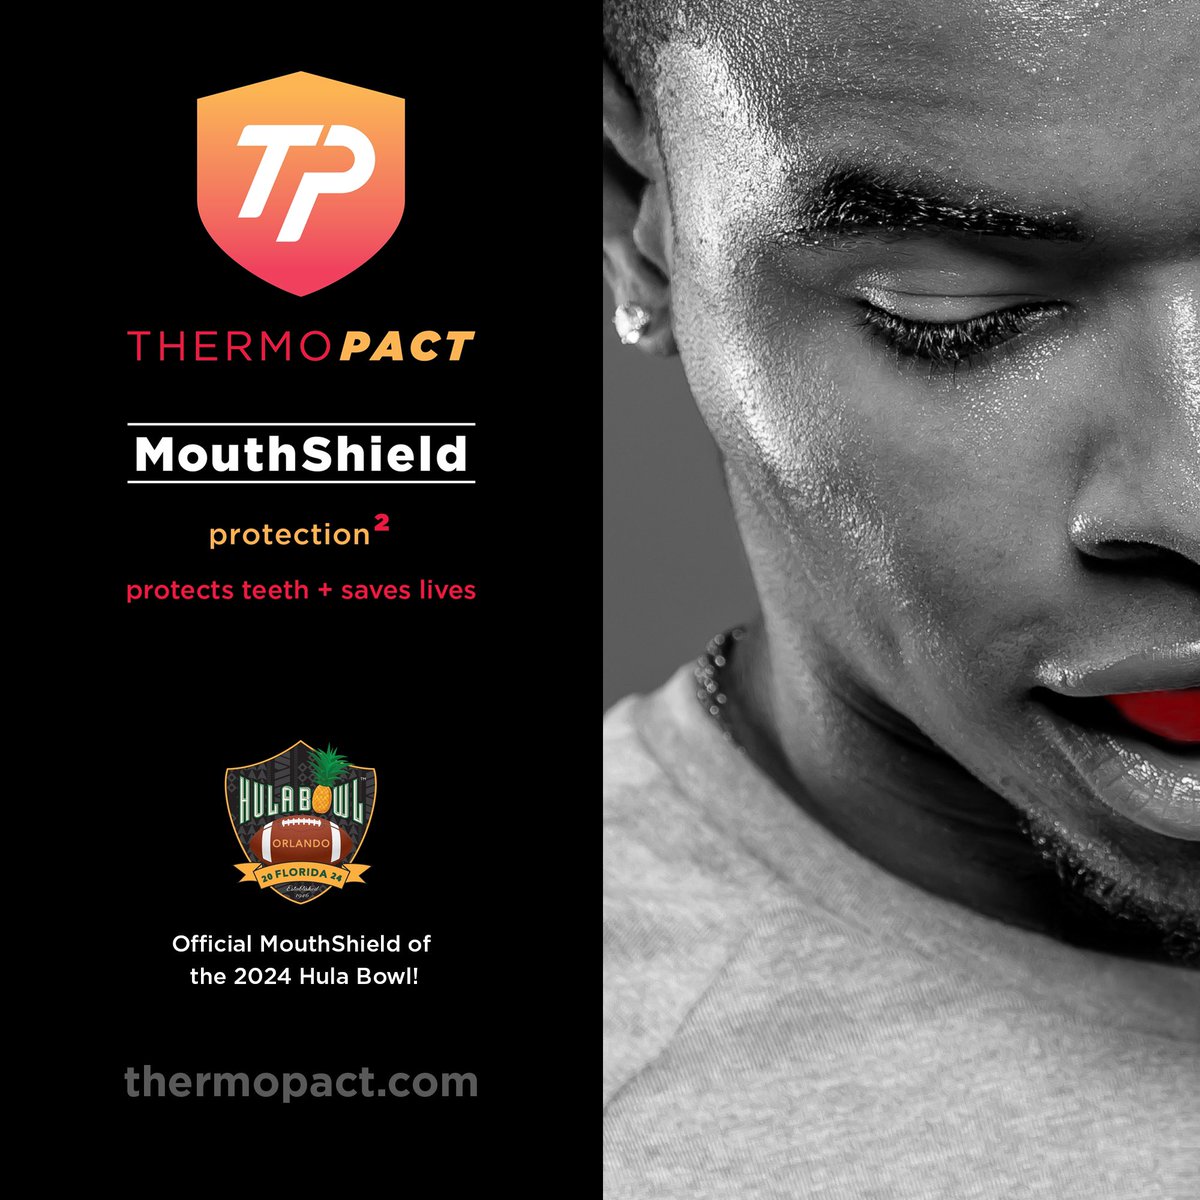 Hula Bowl x ThermoPact - We’re excited to announce ThermoPact MouthShield has been named the official mouthguard of the @Hula_Bowl! protects teeth + saves lives 💥🔥🏈 protection²

#HulaBowl #ThermoPactMouthShield #ProtectsTeethSavesLives #Protection2 #Football #CollegeFootball